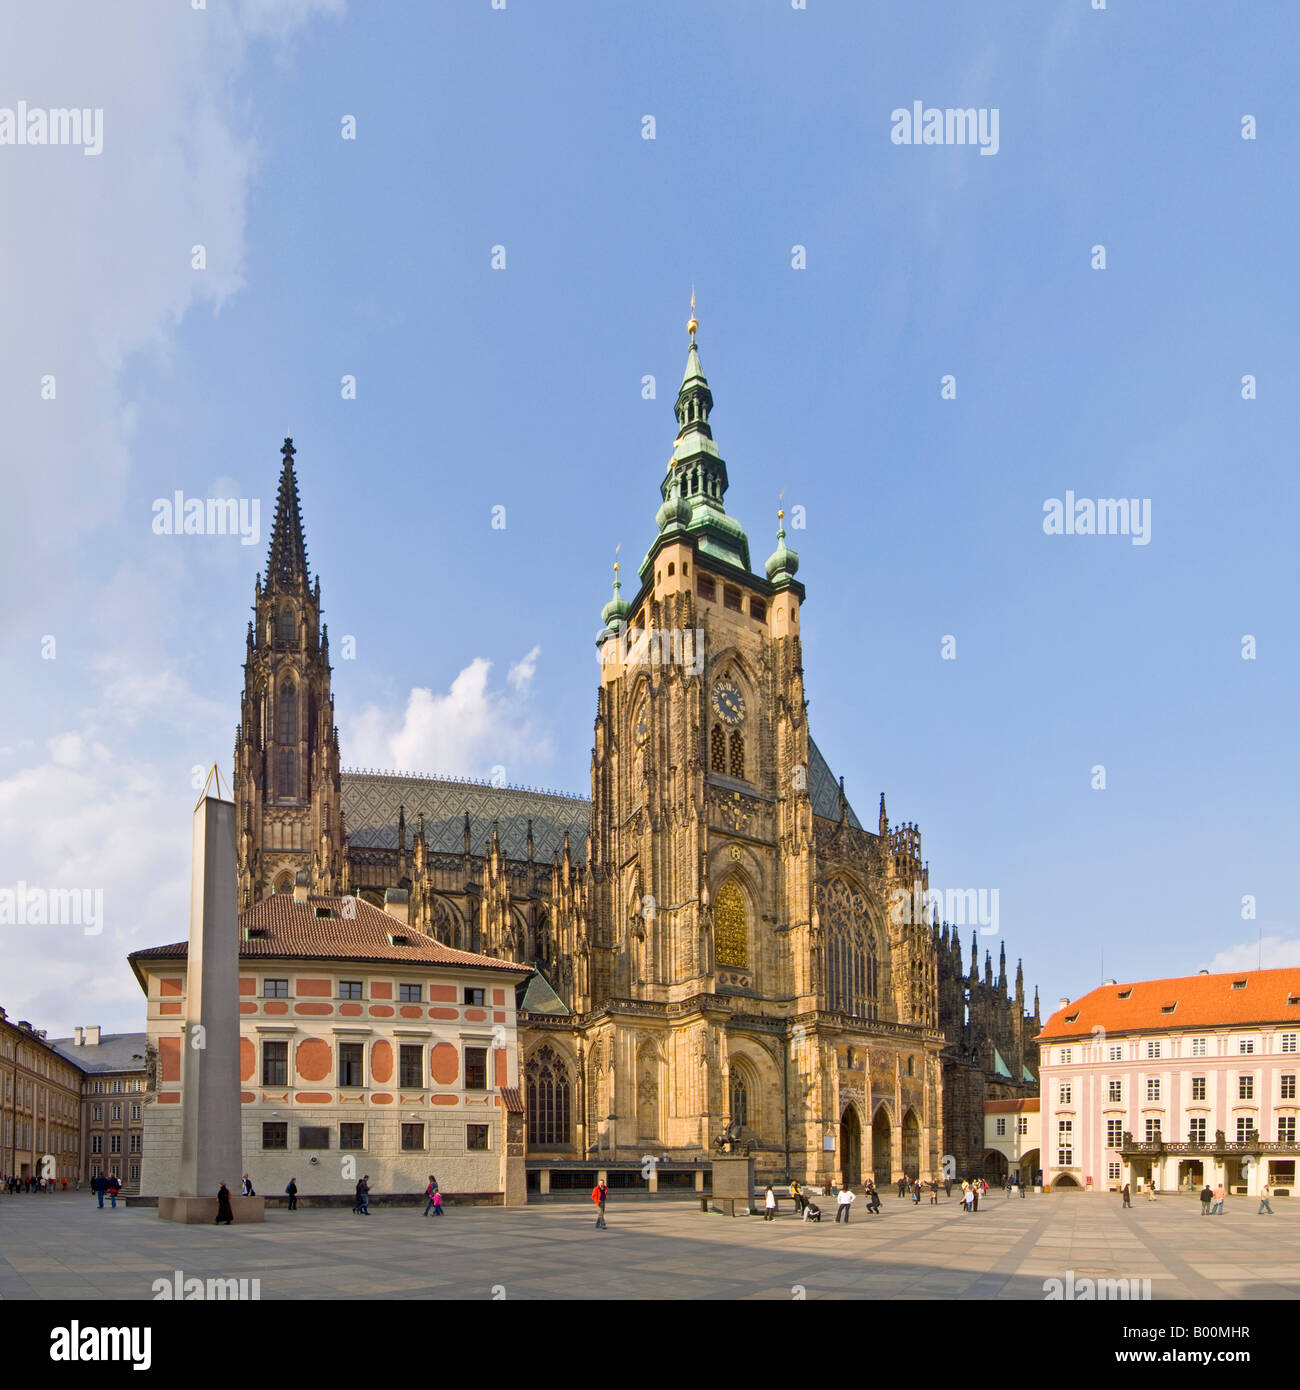 A 2 picture panoramic stitch of tourists around Saint Vitus's Cathedral located within the grounds of Prague Castle. Stock Photo